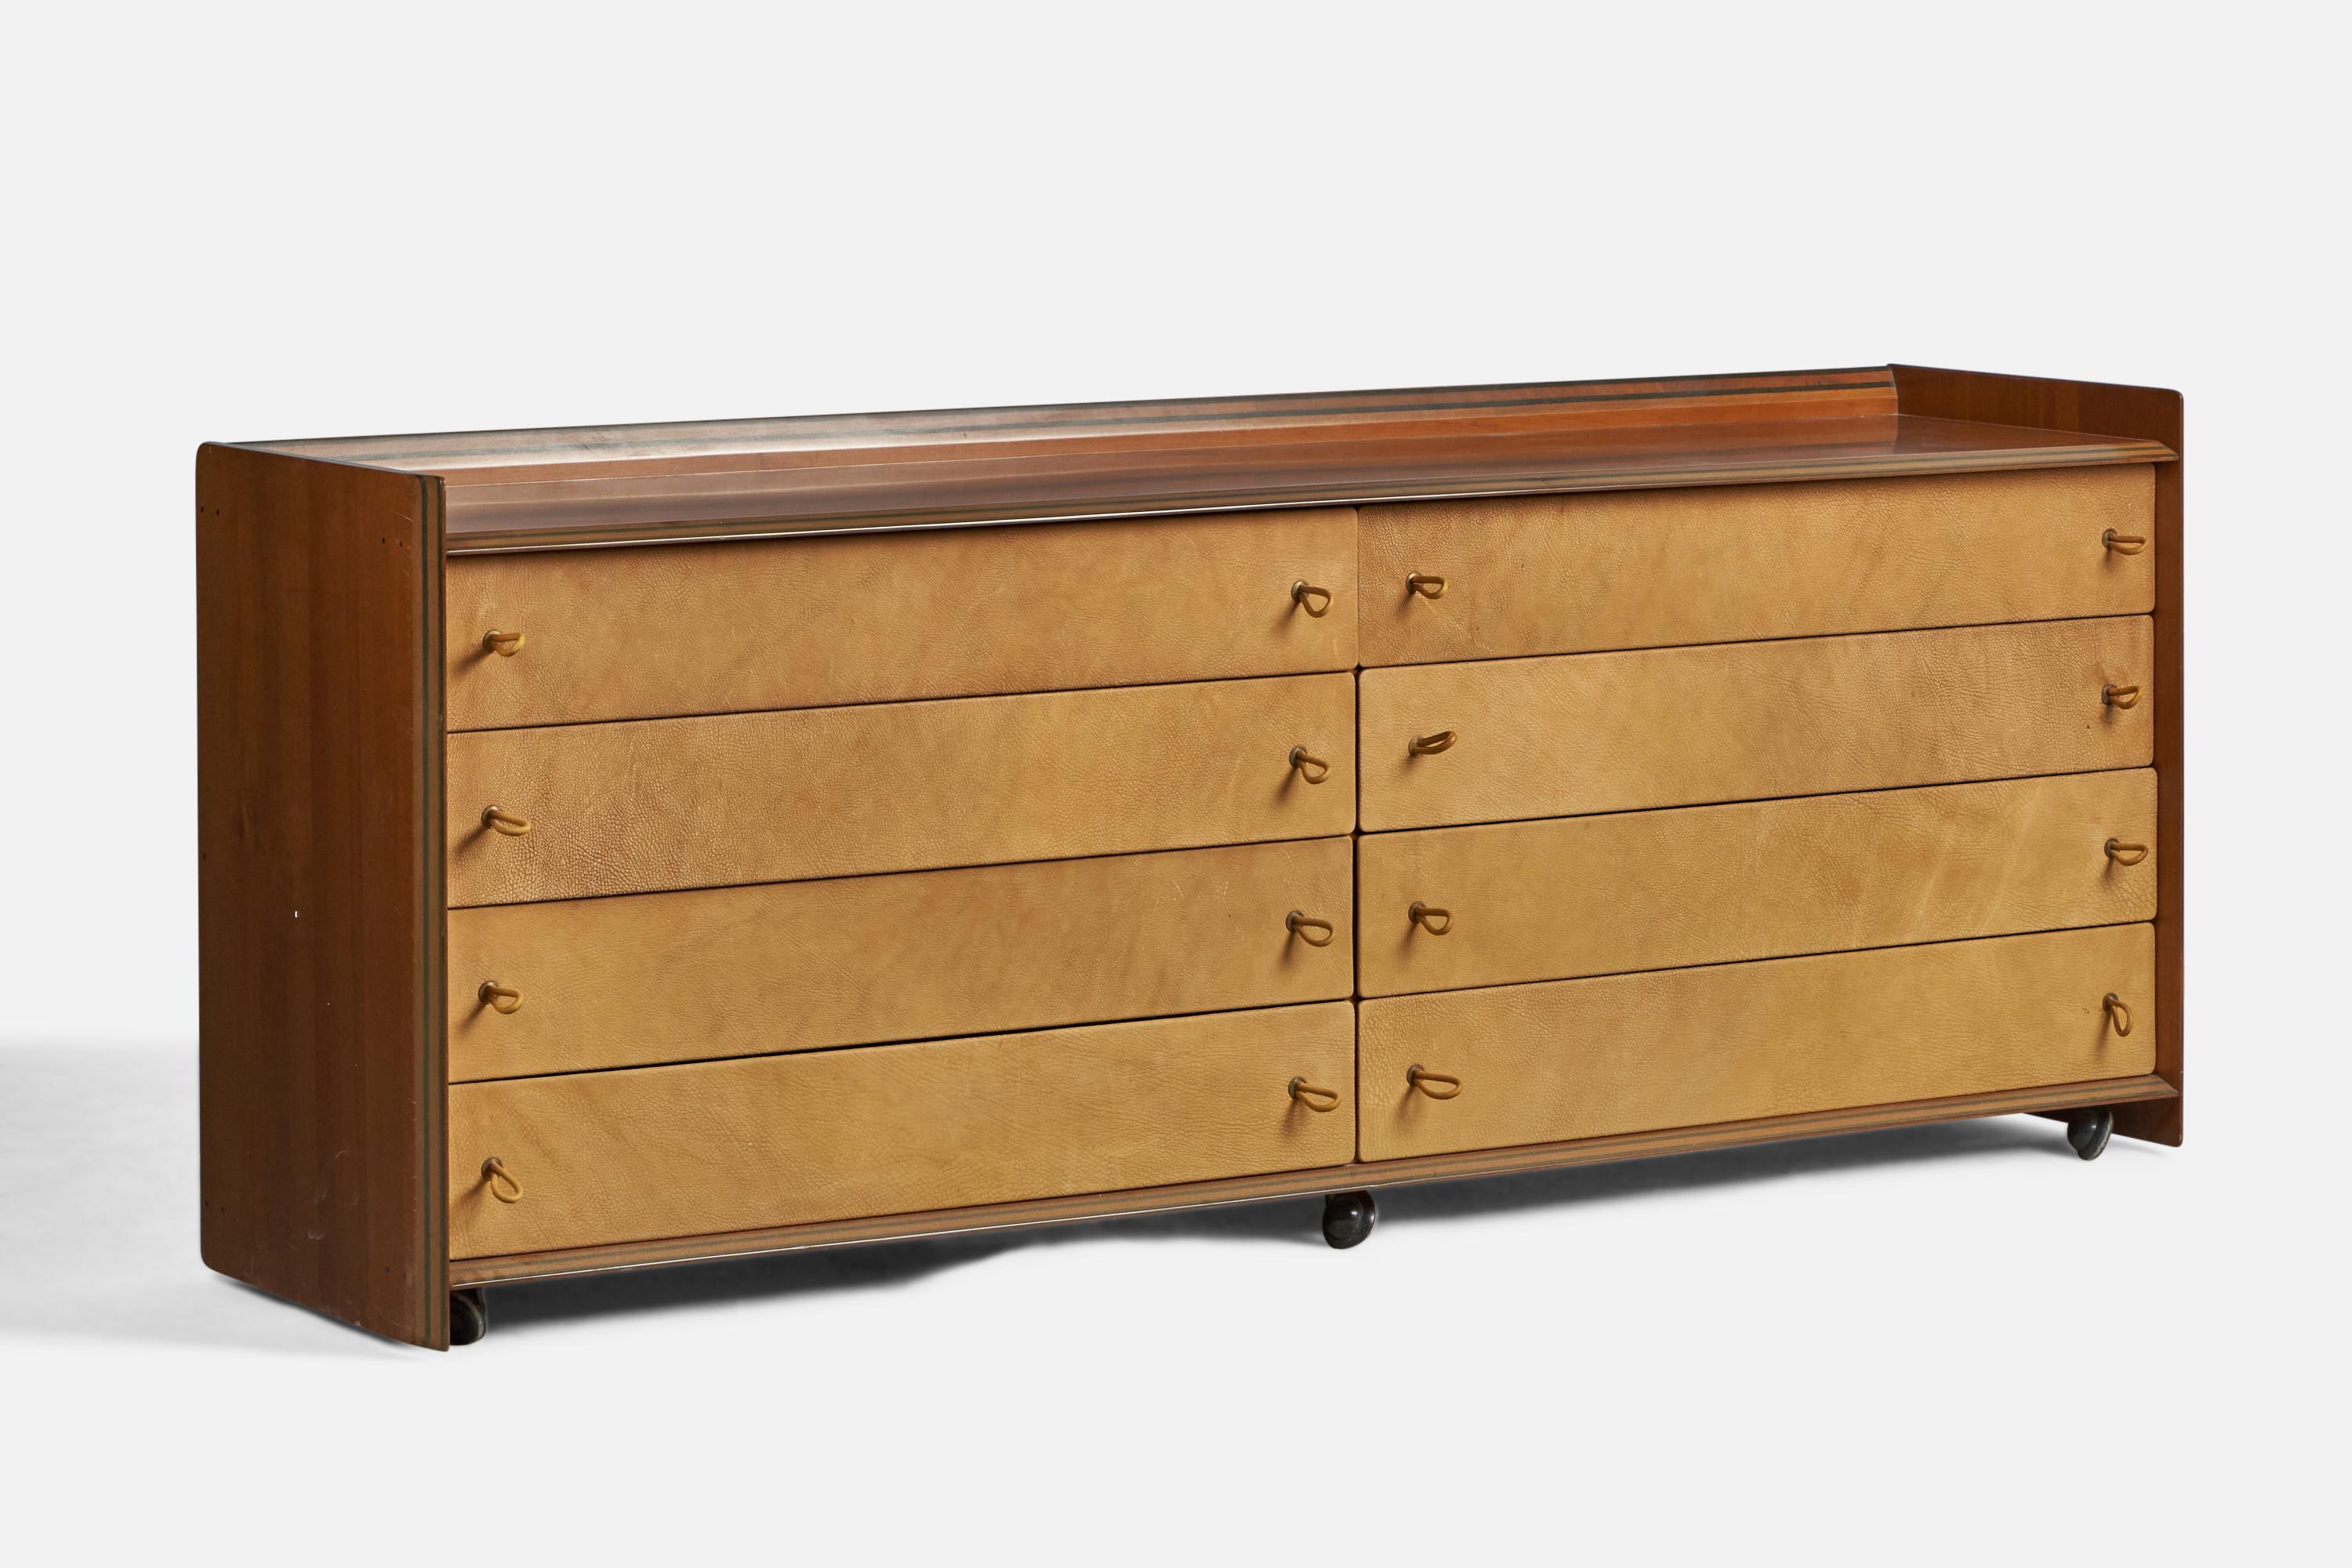 A laminated walnut, leather and brass dresser designed by Afra & Tobia Scarpa and produced by Maxalto, Italy, 1970s.